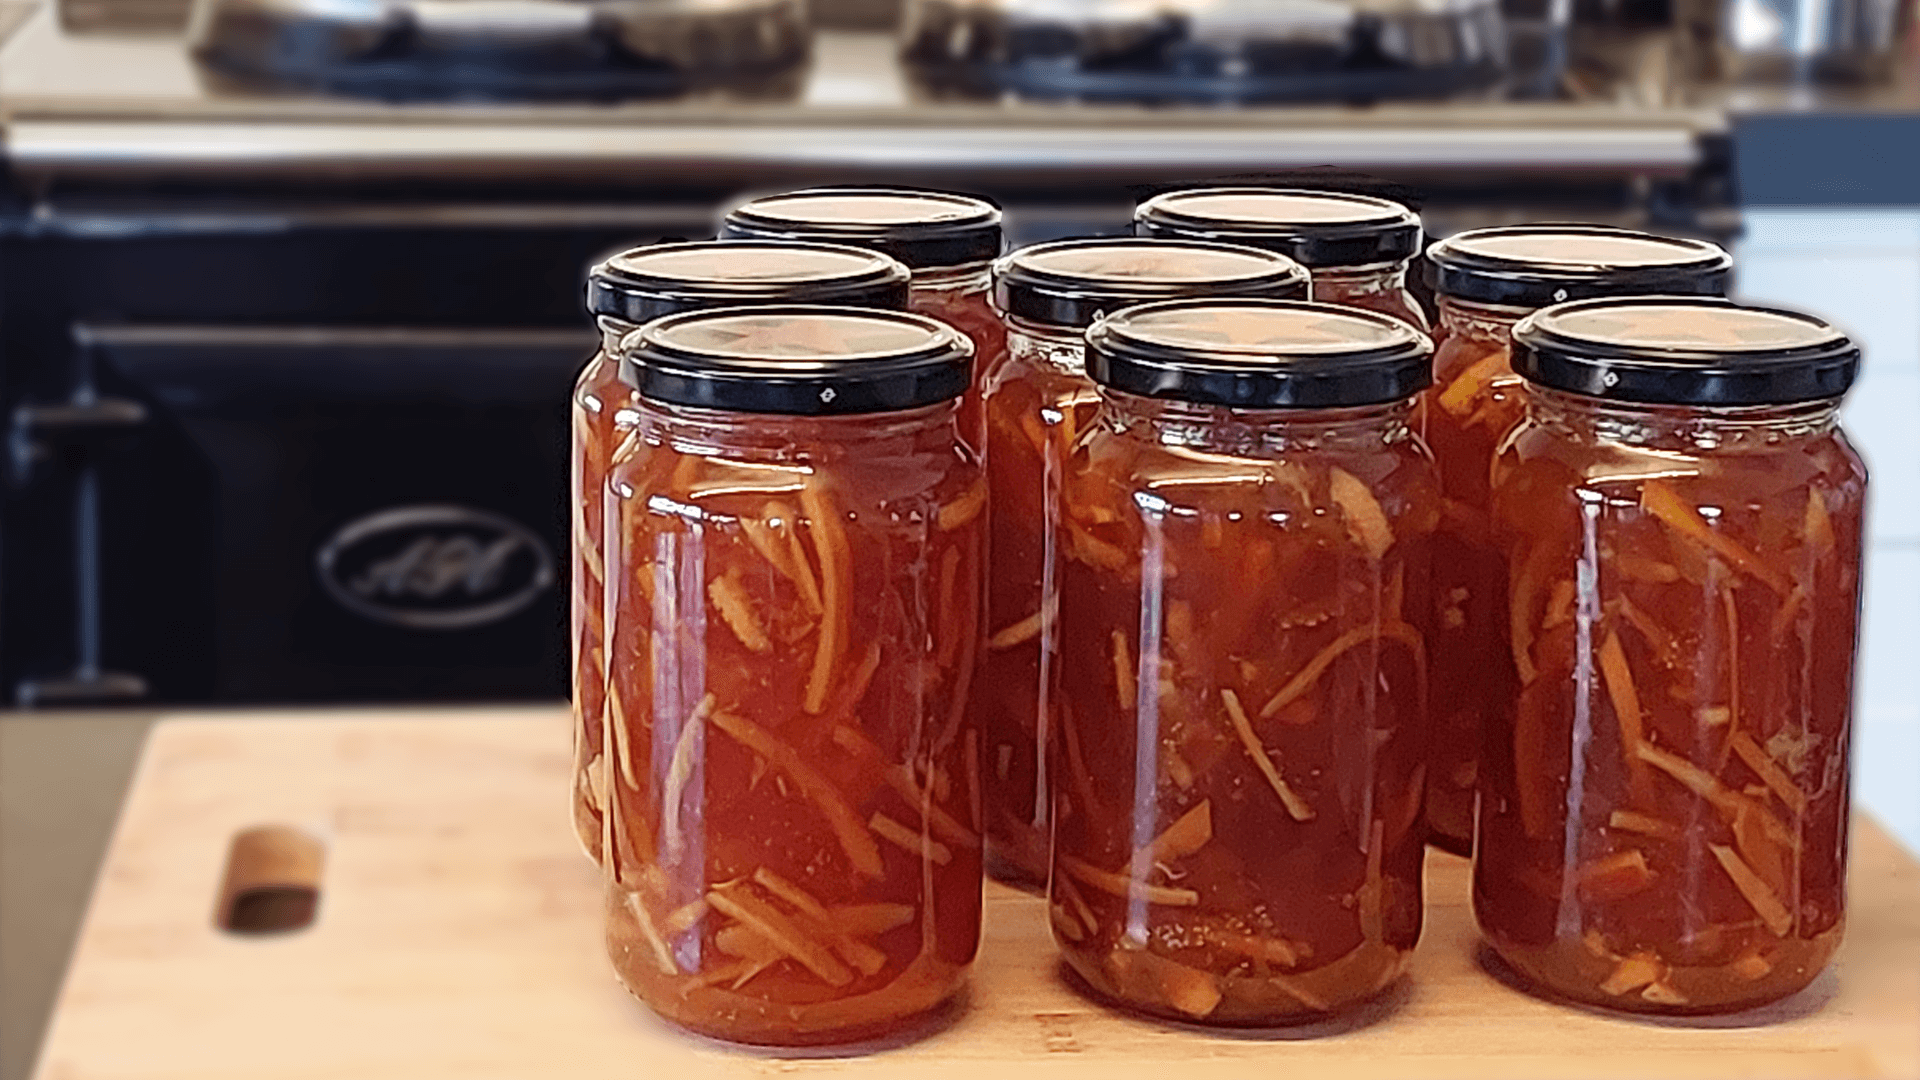 Eight jars of orange marmalade sit on top of a wooden chopping board with a dark blue AGA stove in the backround.